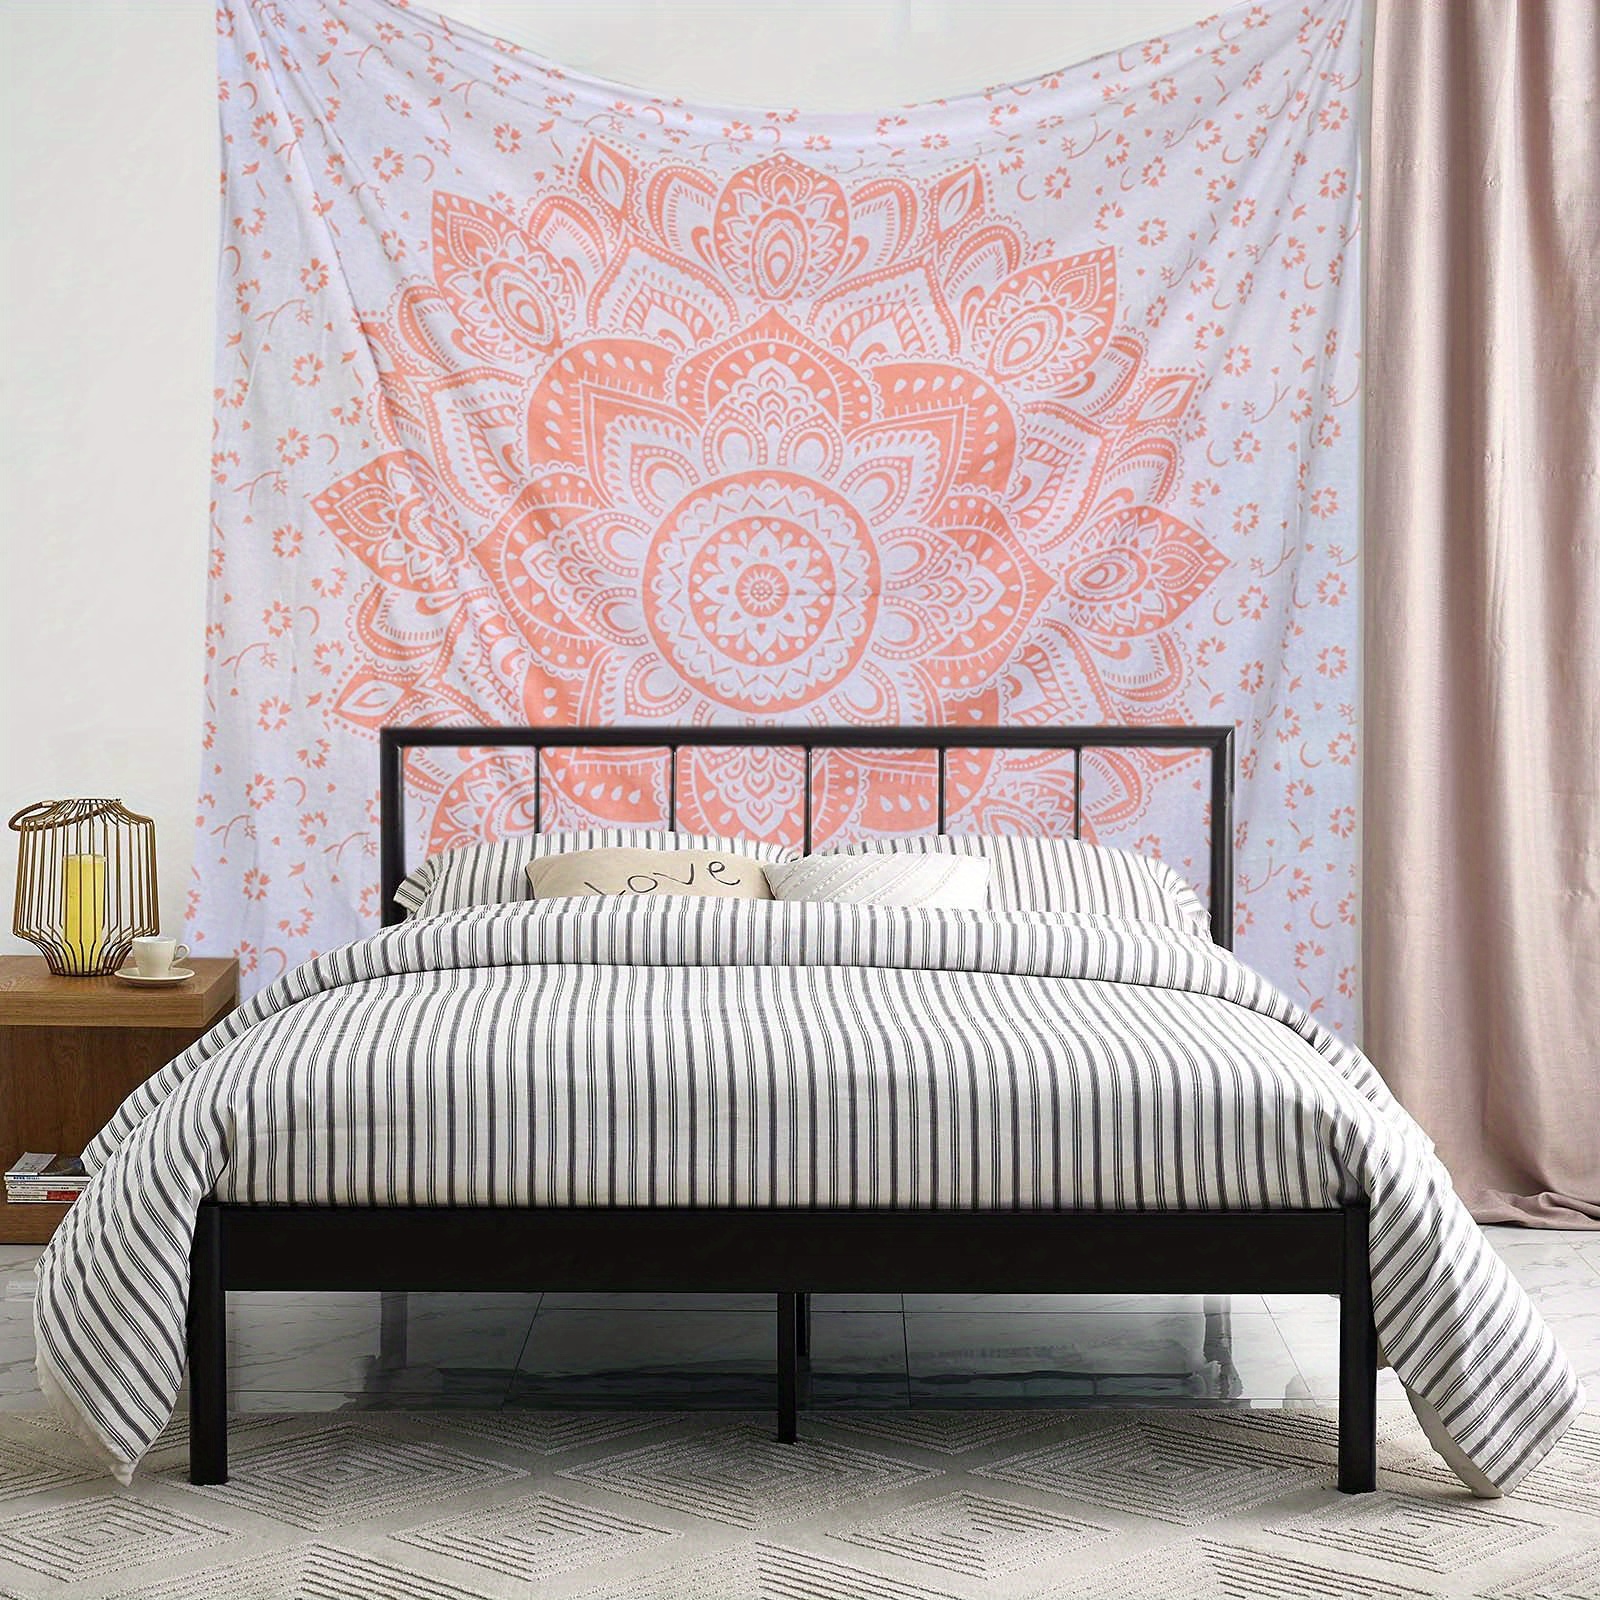 Wall Tapestry for Bedroom Aesthetic Tapestry Hippie Boho Tapestry Indie  Tapestry Bohemian Mandala Tapestry Trippy Large Tapestry Wall Hanging -  Black